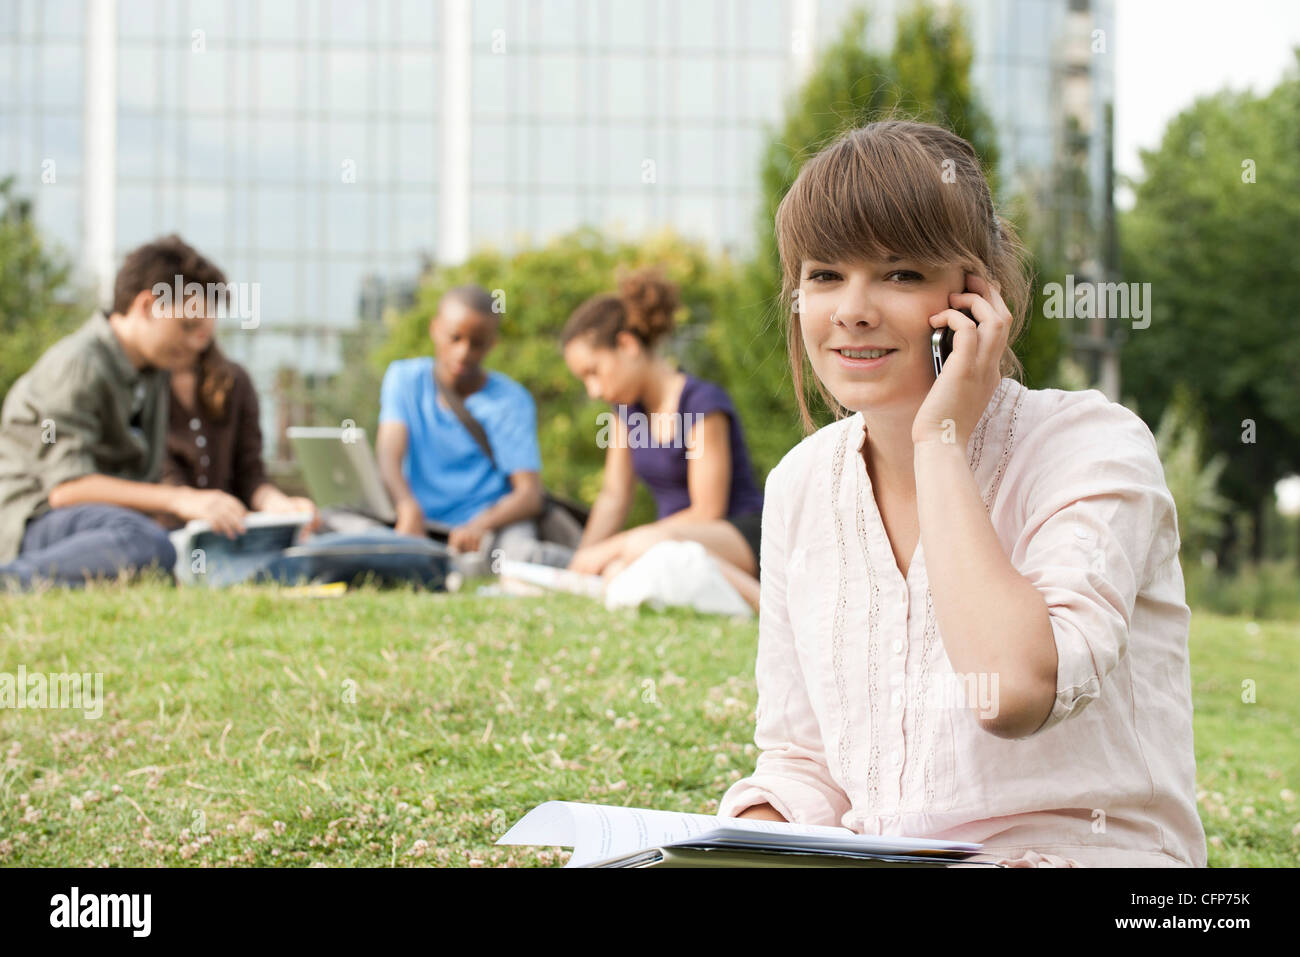 Young woman talking on cell phone, people in background, portrait Stock Photo